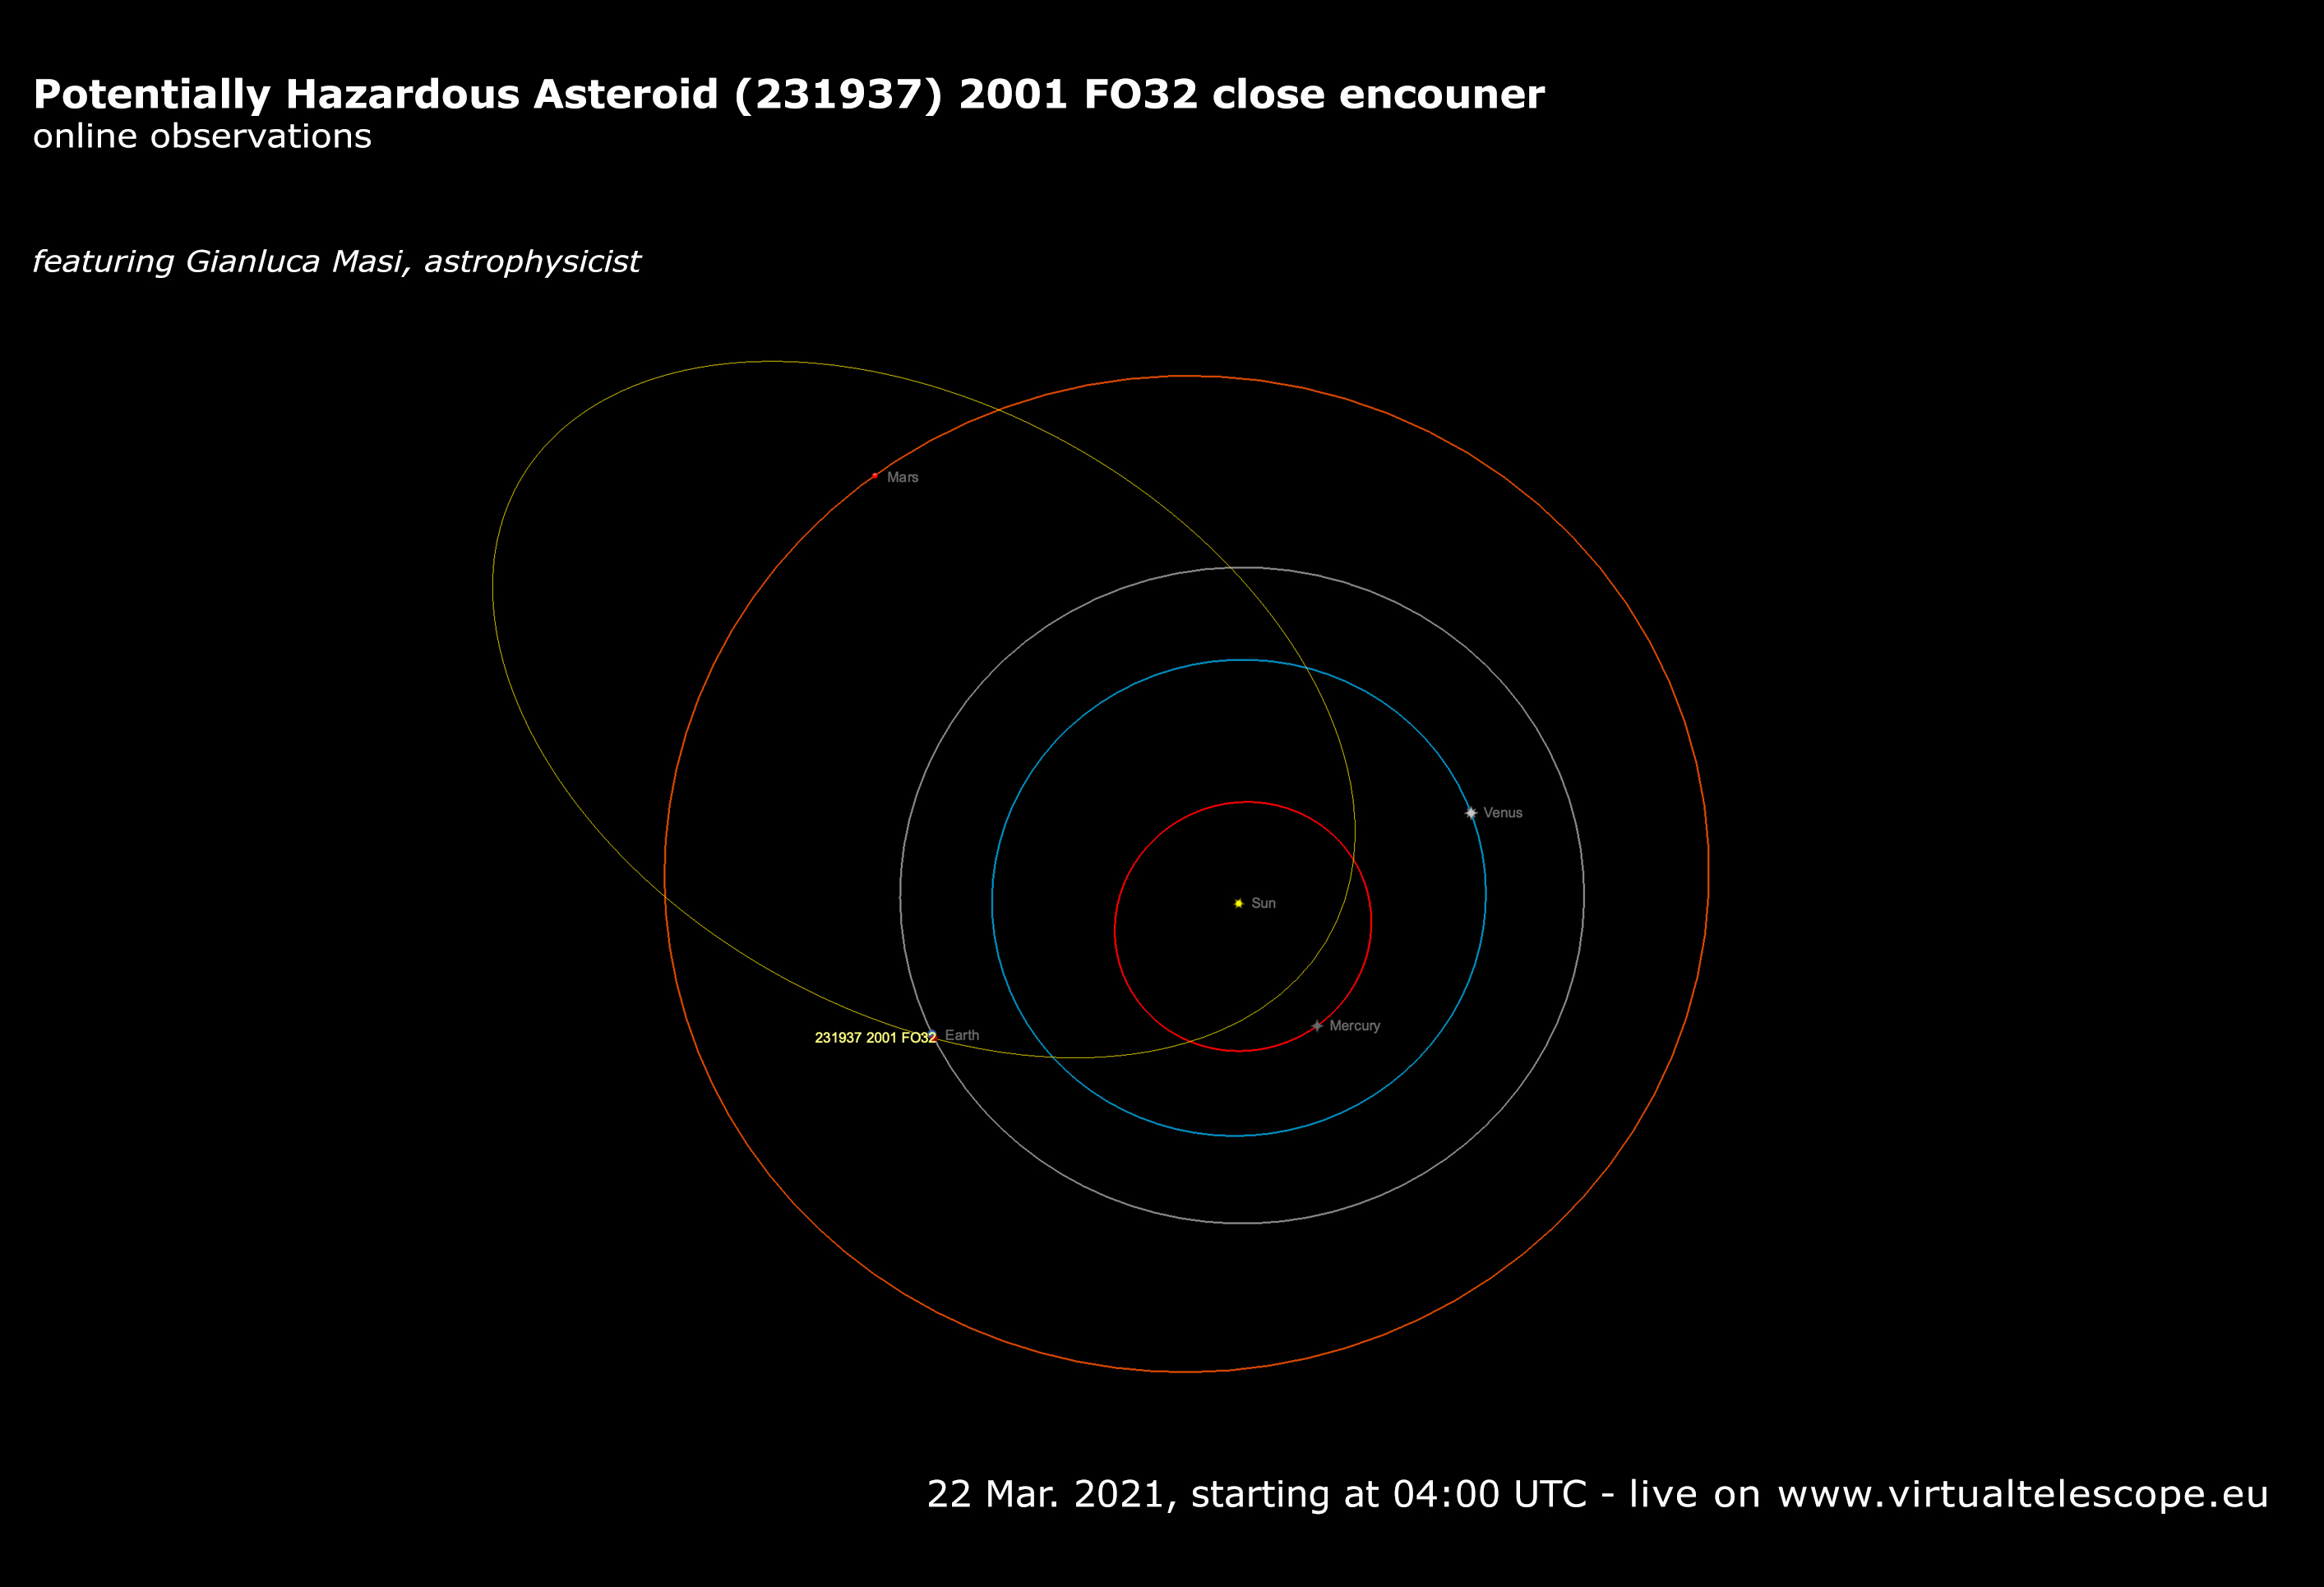 Potentially Hazardous Asteroid 231937 (2001 FO32): poster of the event.